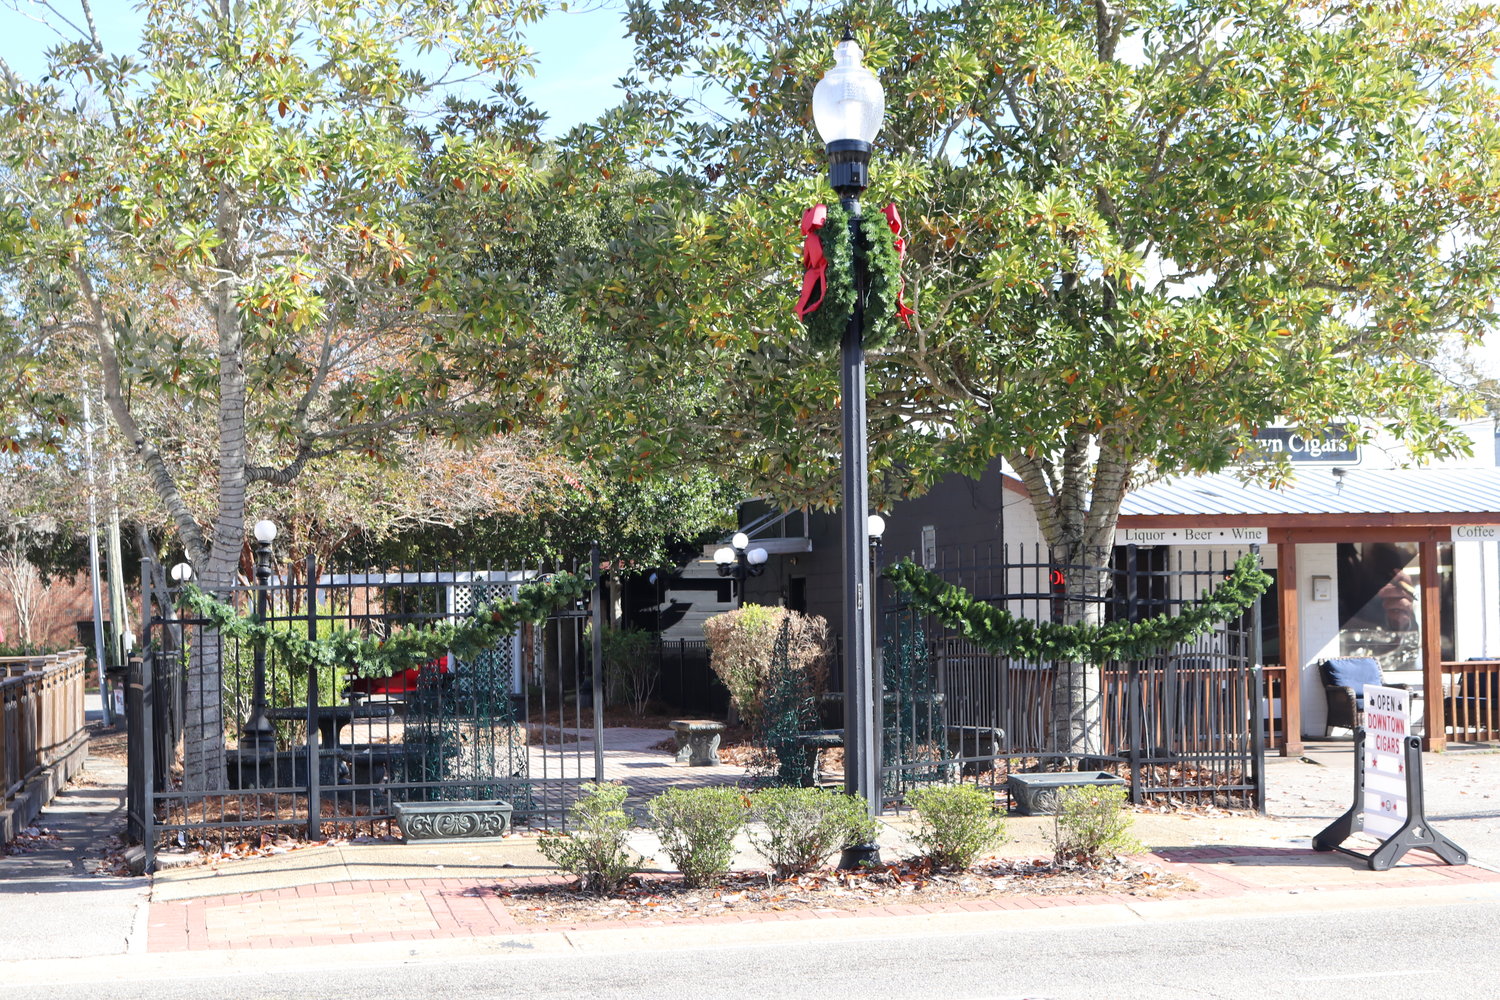 The Daphne Downtown Redevelopment Authority is asking the City Council to lease a city-owned parcel on Main Street downtown to be developed for commercial and residential use. A small park is now located on the site.